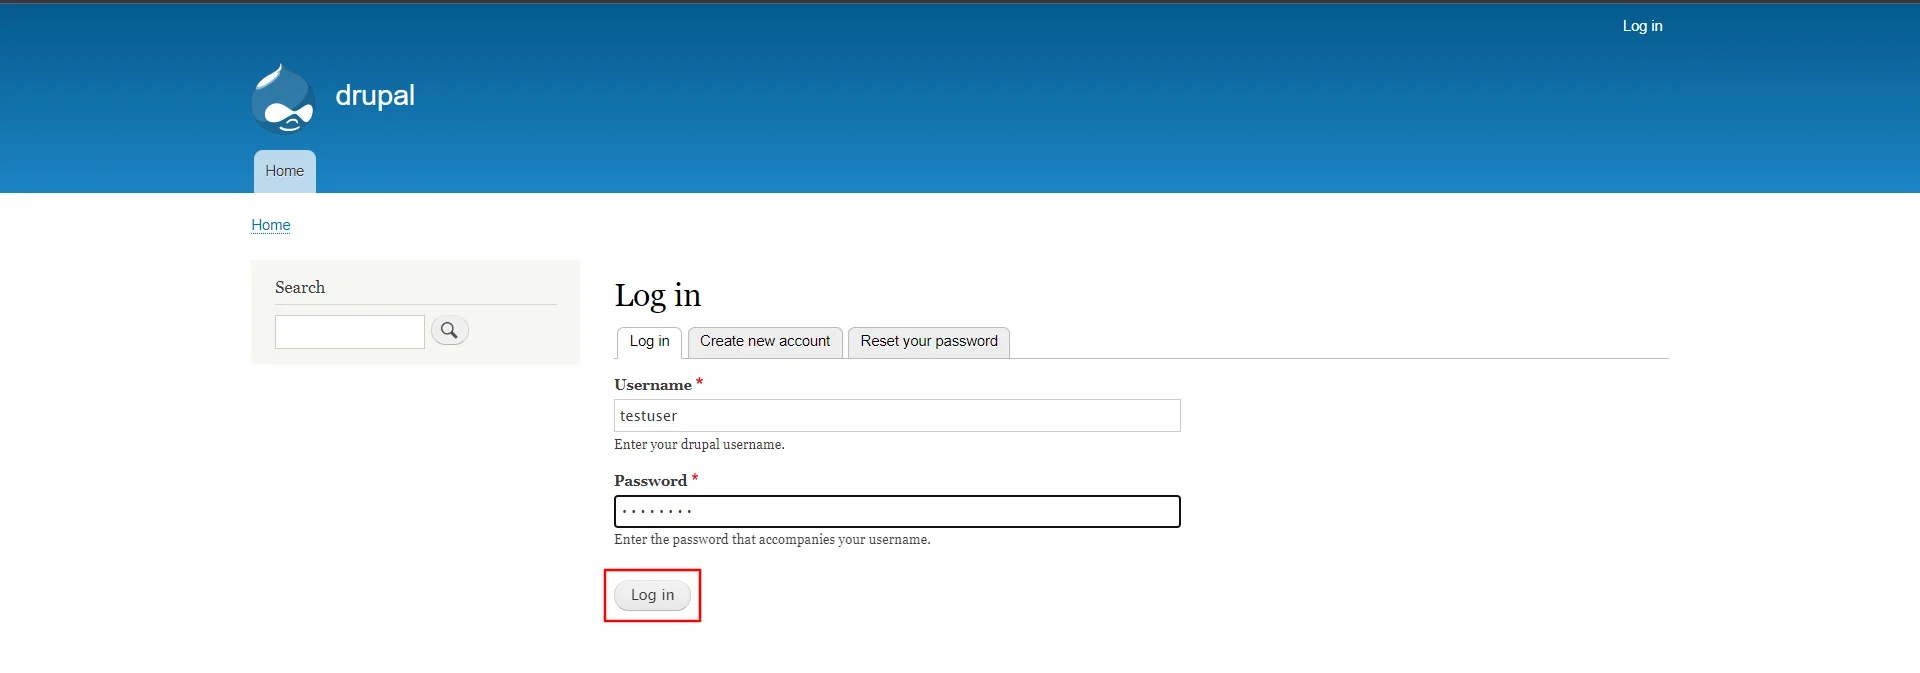 Drupal 2FA - enter username and password into drupal site